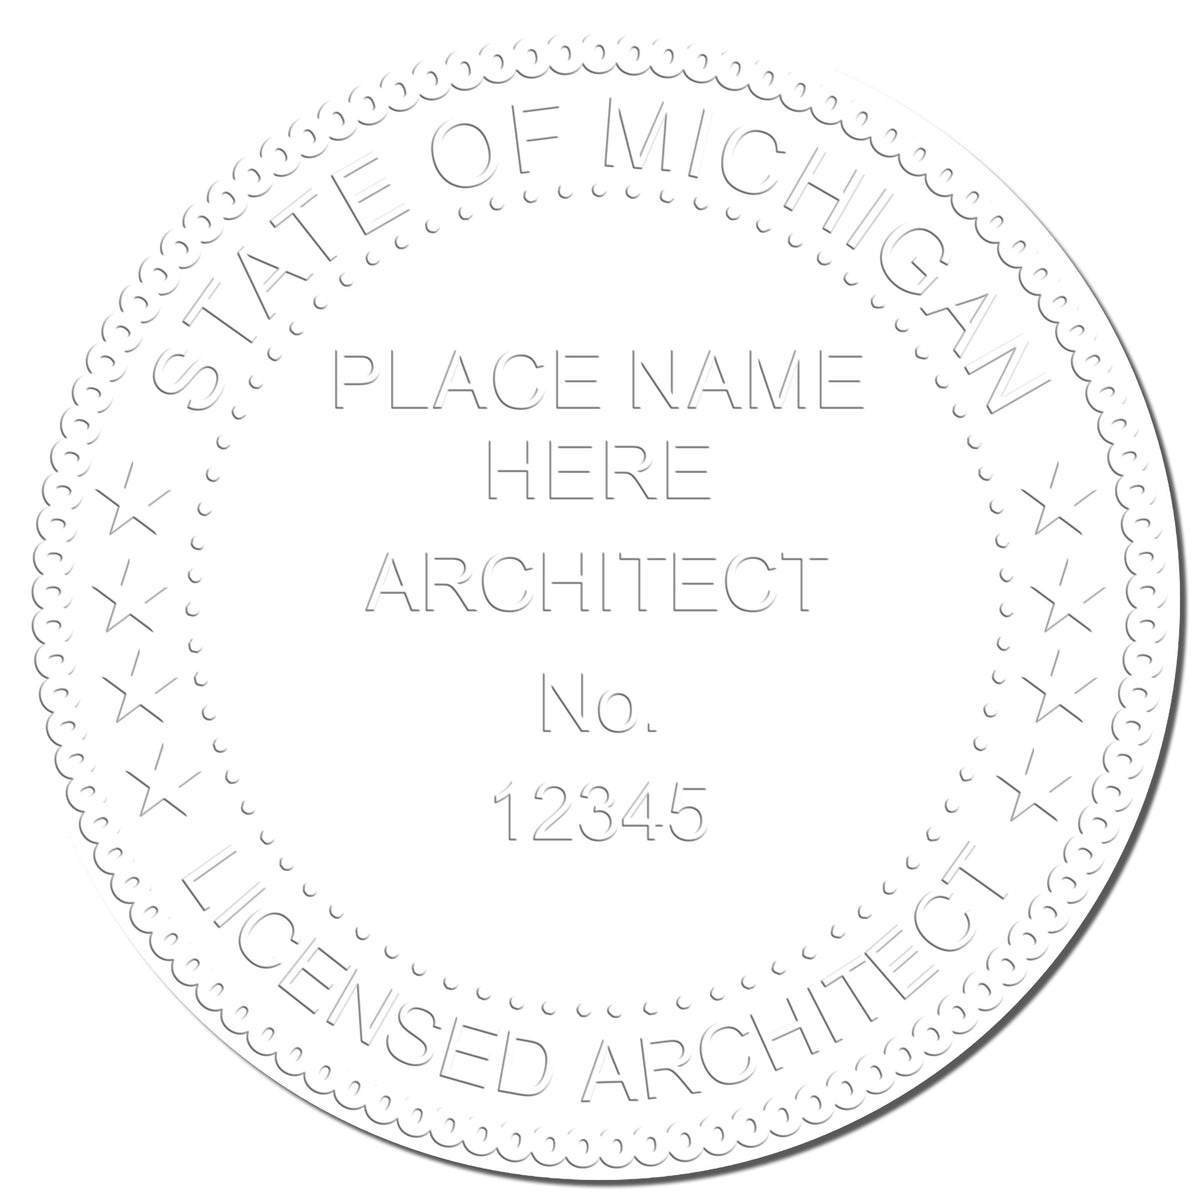 This paper is stamped with a sample imprint of the State of Michigan Architectural Seal Embosser, signifying its quality and reliability.